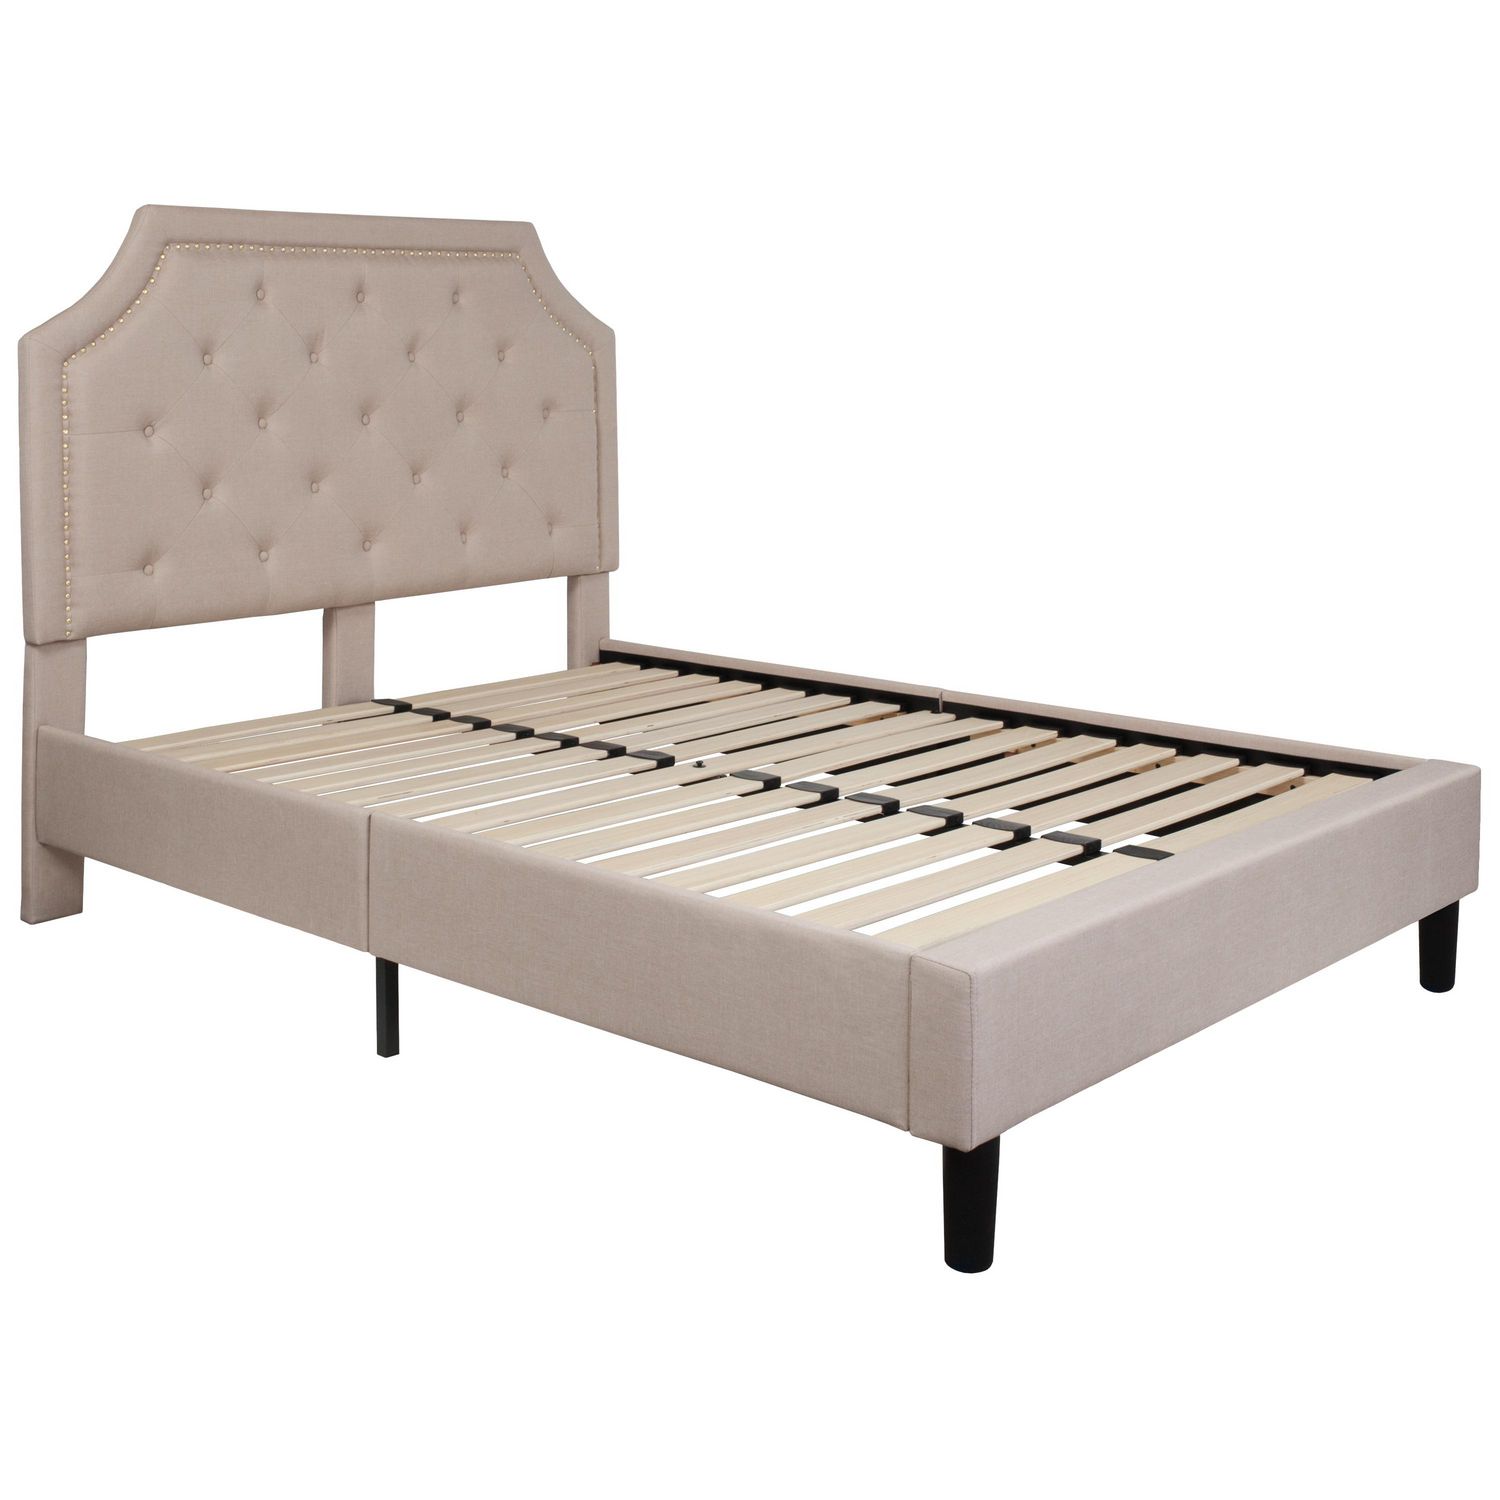 Brighton Full Size Tufted Upholstered Platform Bed In Beige Fabric